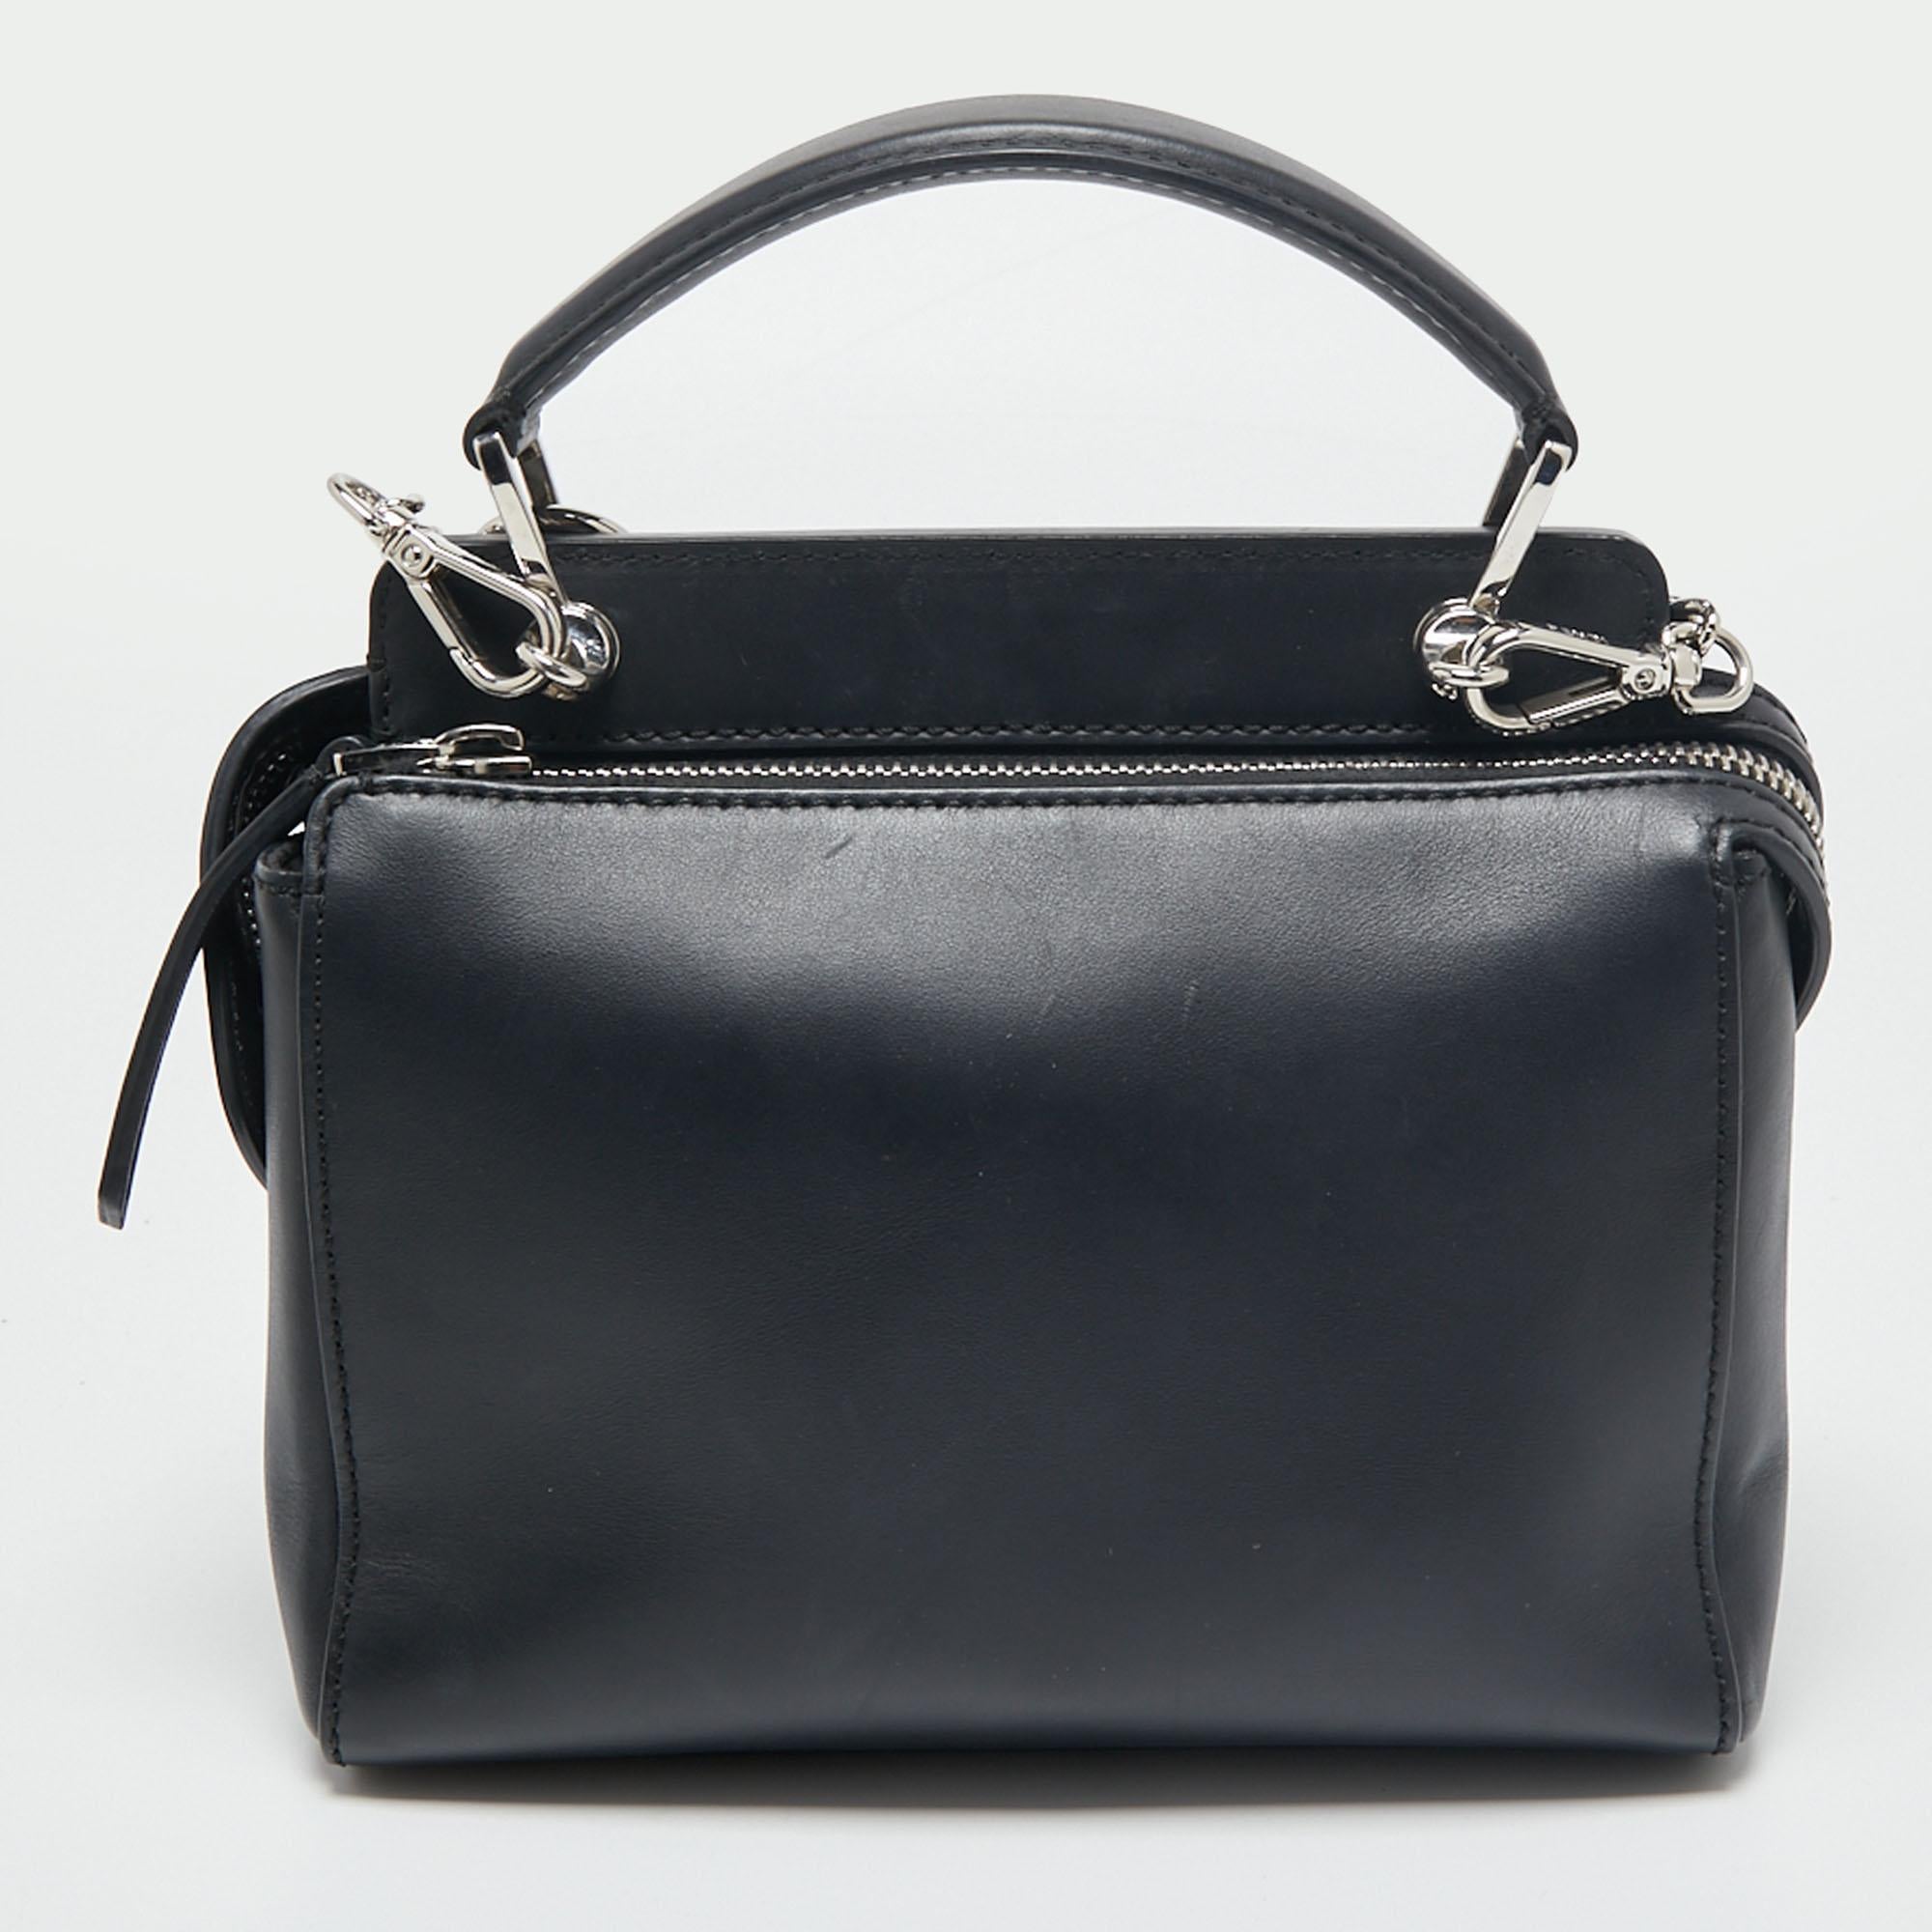 We are in love with this shoulder bag from Fendi. Skilfully crafted from leather, it has a decorated exterior, and the top zippers reveal suede compartments roomy enough to carry your daily essentials. The black bag is complete with protective metal